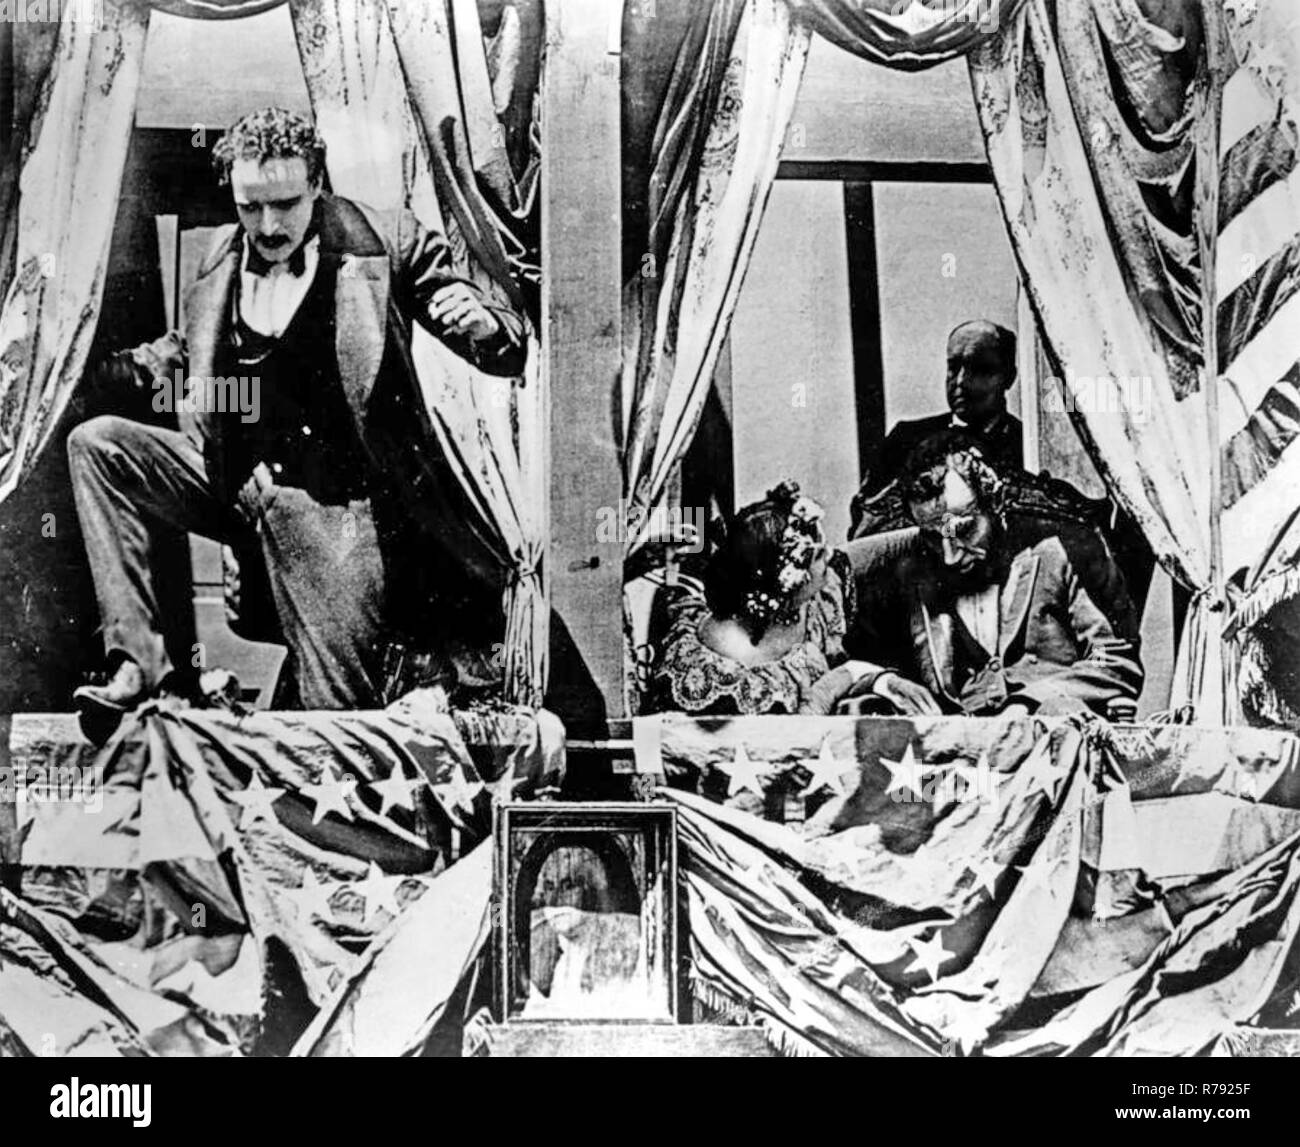 BIRTH OF A NATION 1915 D.W.Griffith silent film with Raoul Walsh as John Wilkes Booth escaping from Ford's Theatre after assassinating Lincoln played by Joseph Henabery Stock Photo